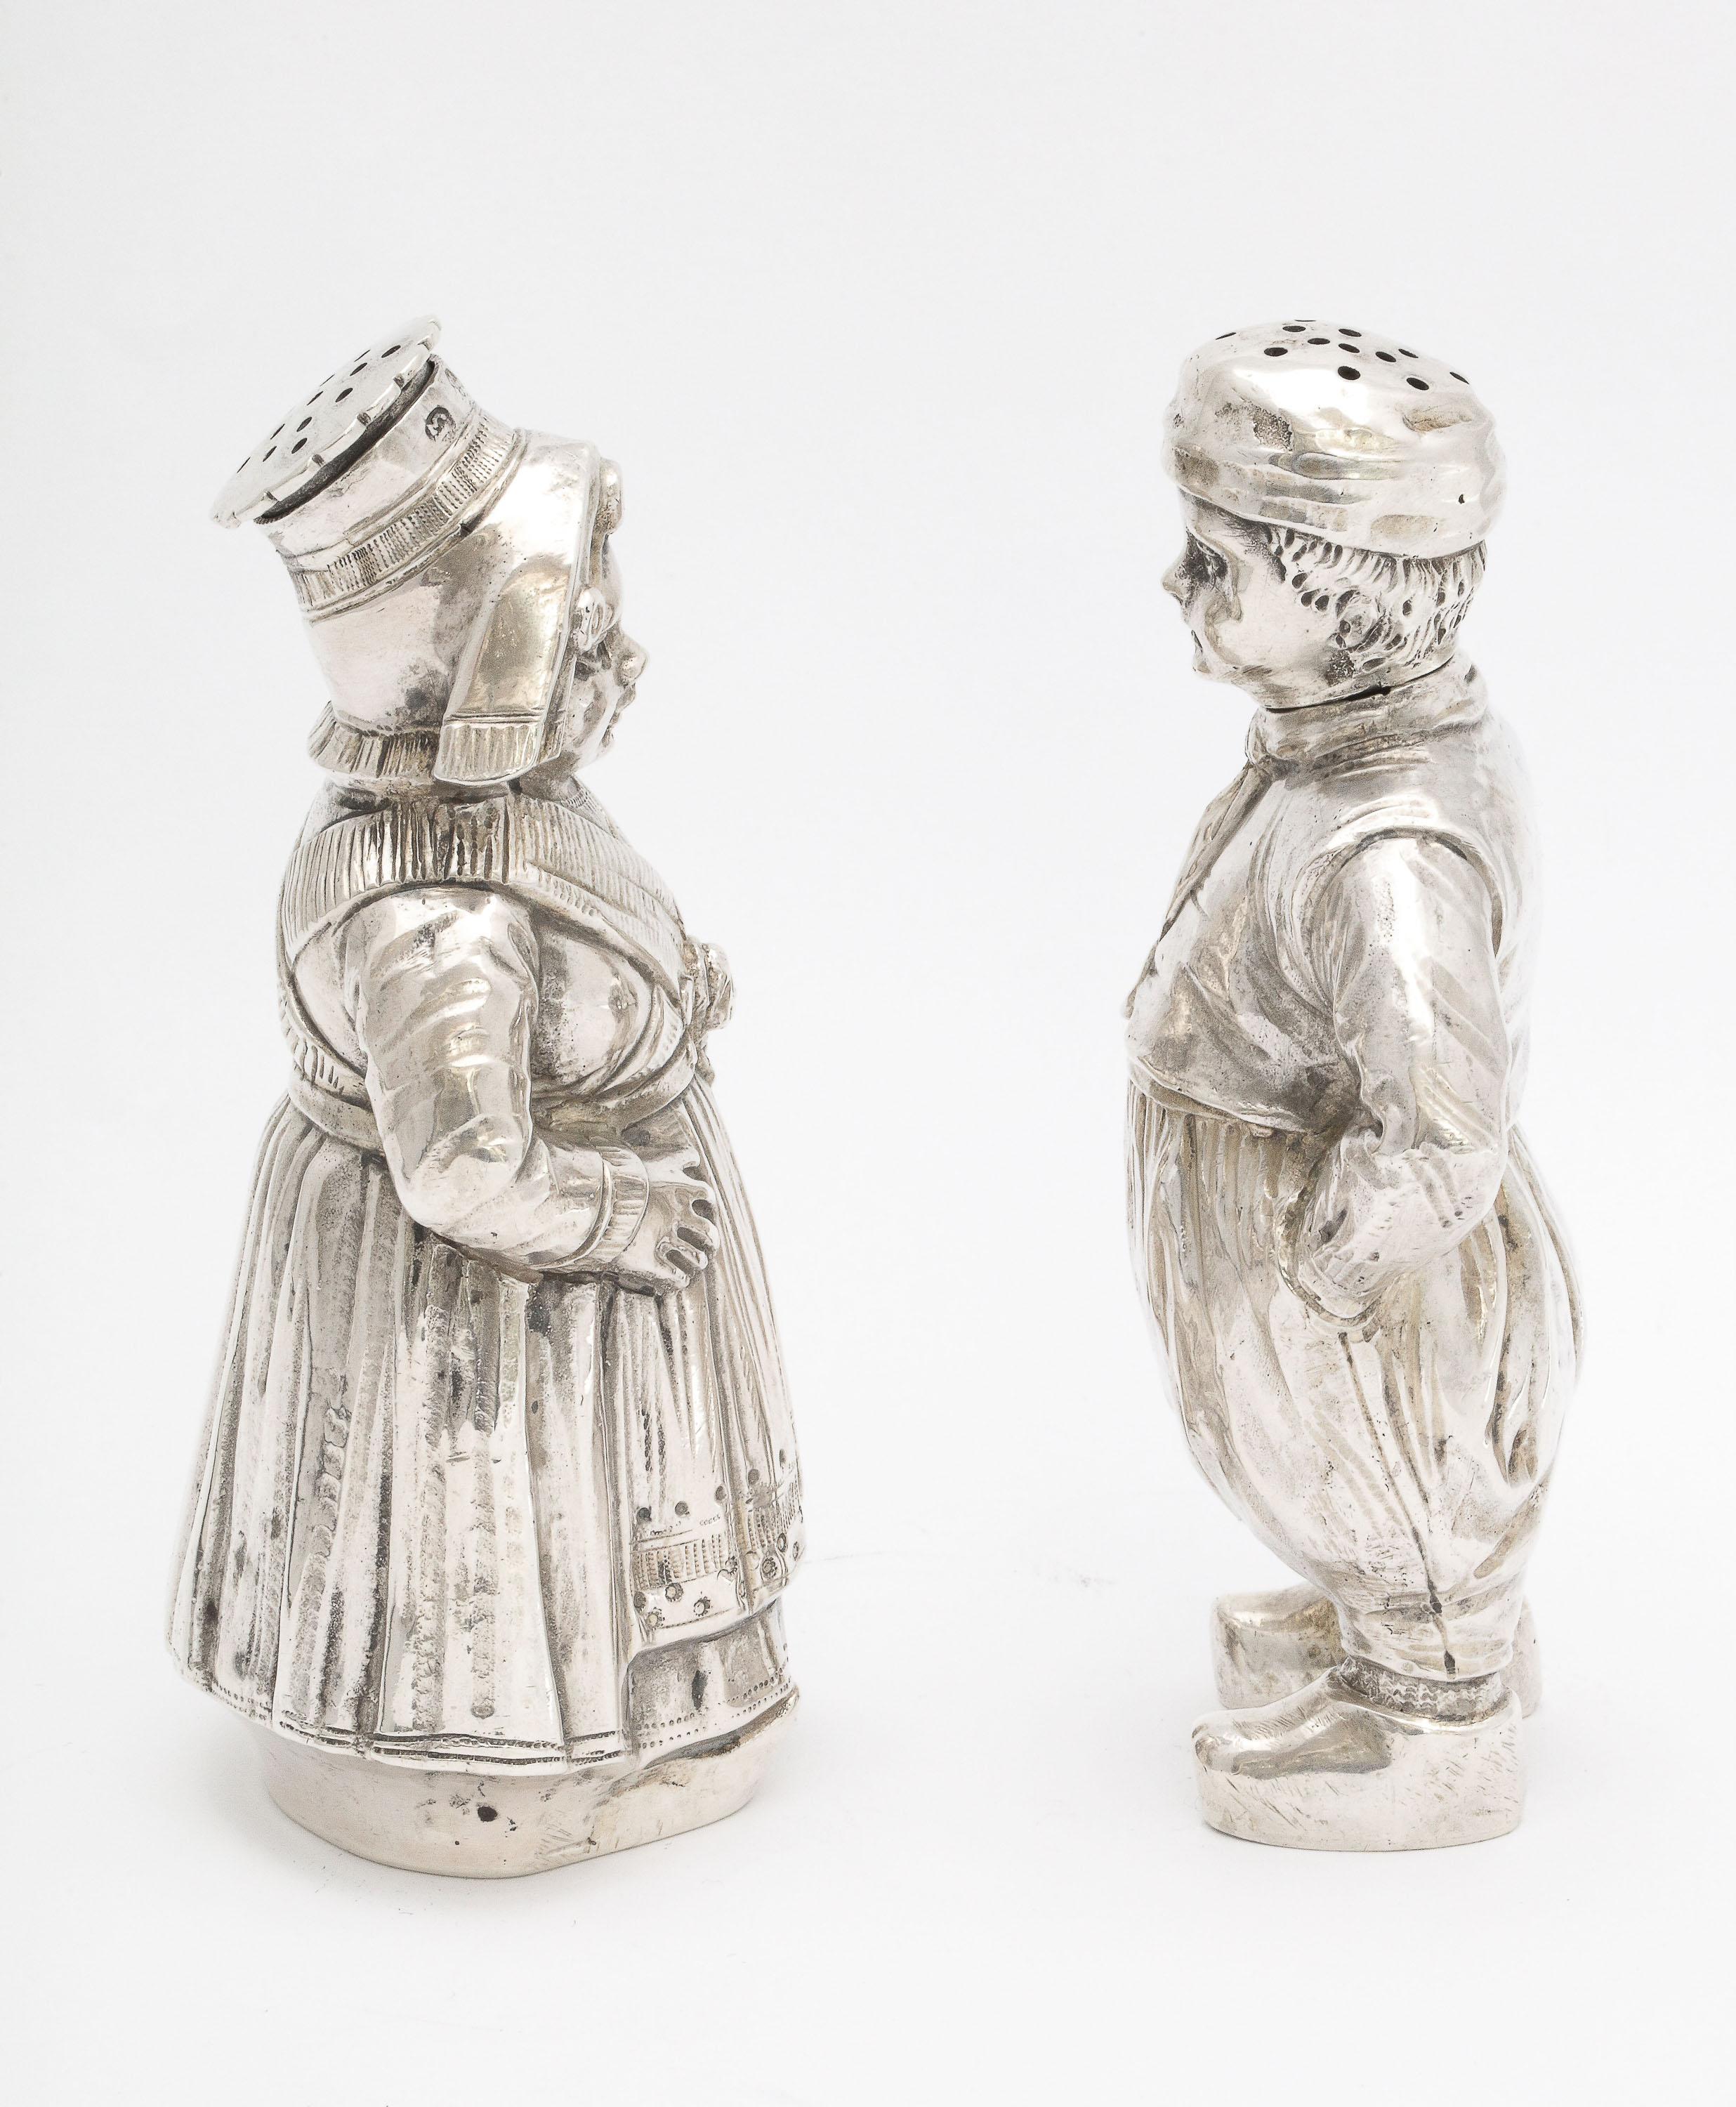 Austrian Pair of Continental Silver '.835' Dutch Boy and Girl Salt and Pepper Shakers